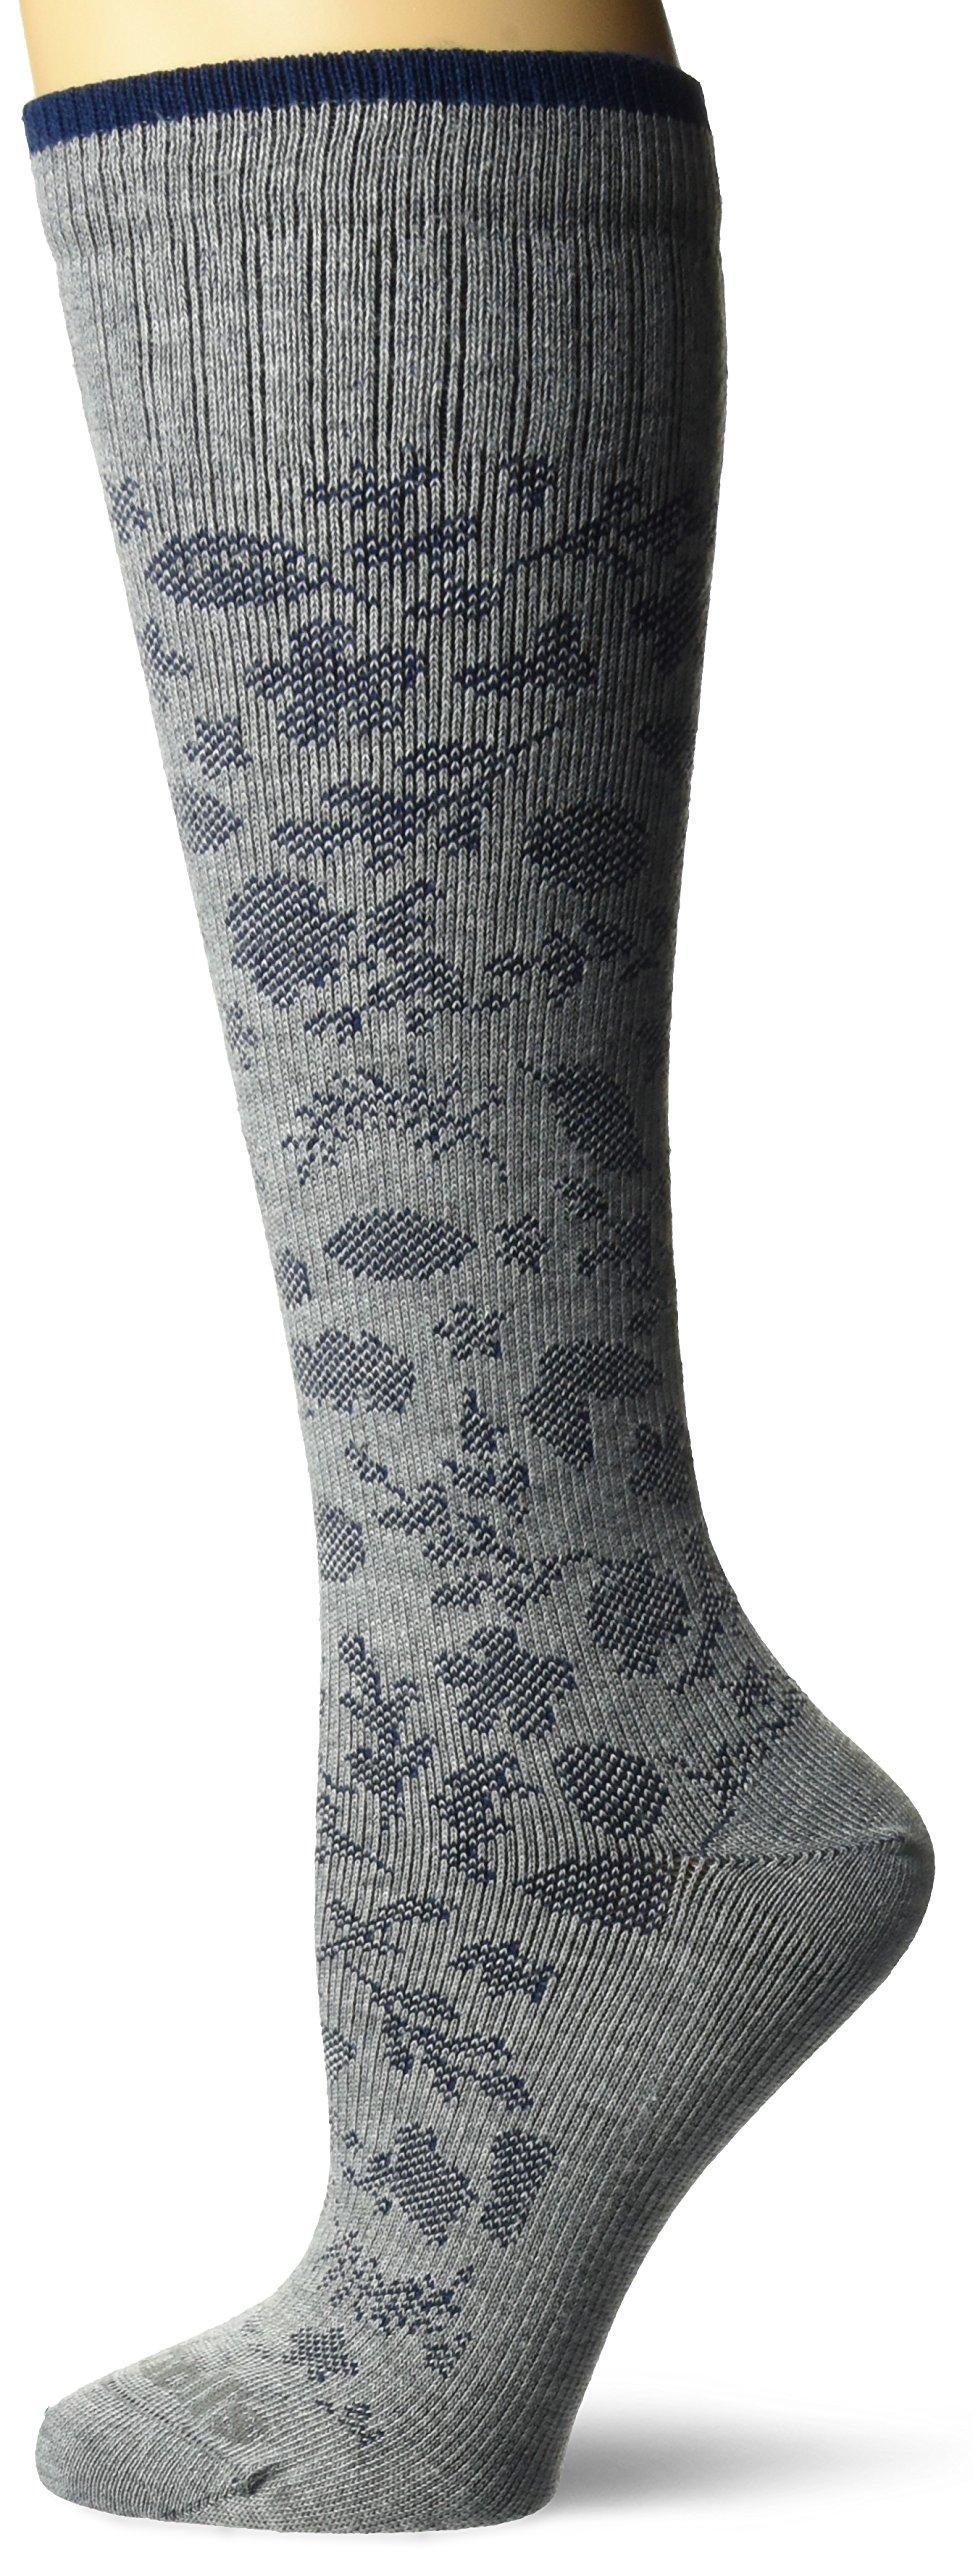 Dr. Scholls Travel Knee High Socks With Graduated Compression in Gray | Lyst